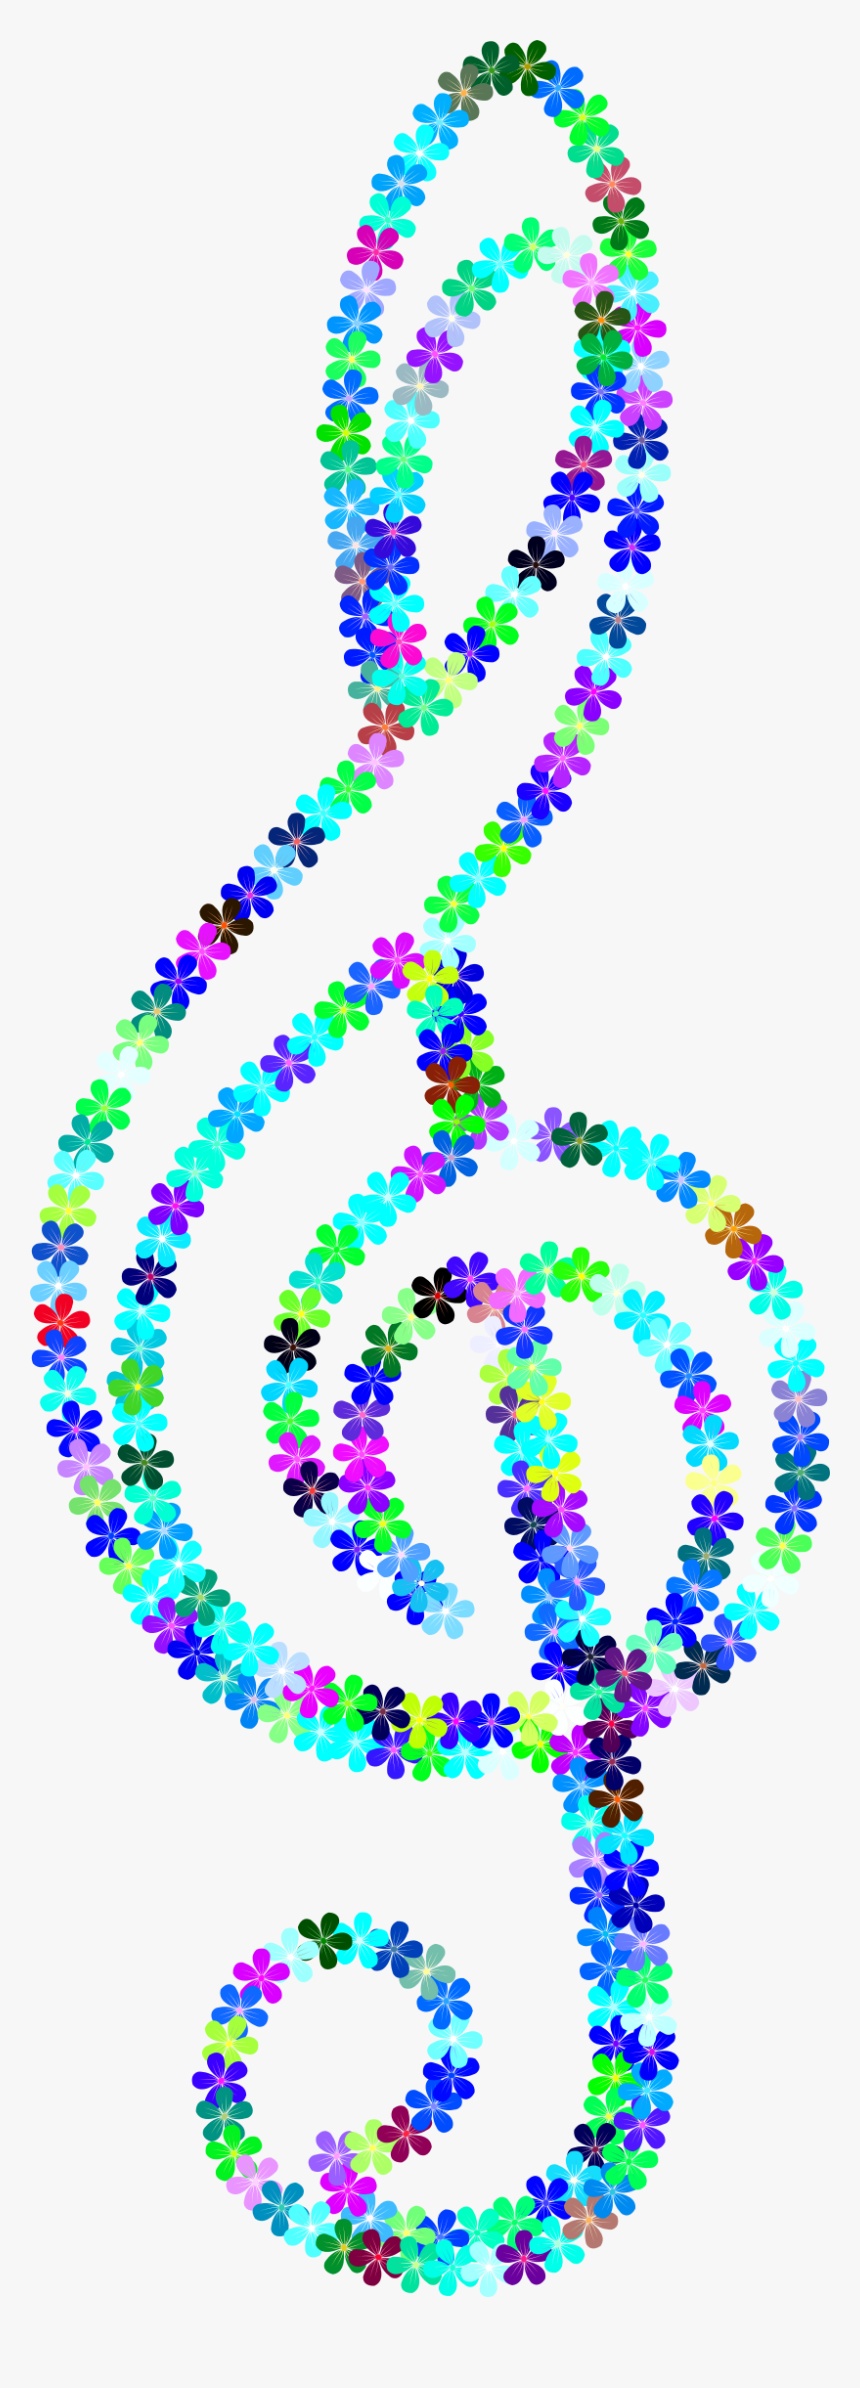 Floral Clef Outline Clip Arts - Circle, HD Png Download, Free Download